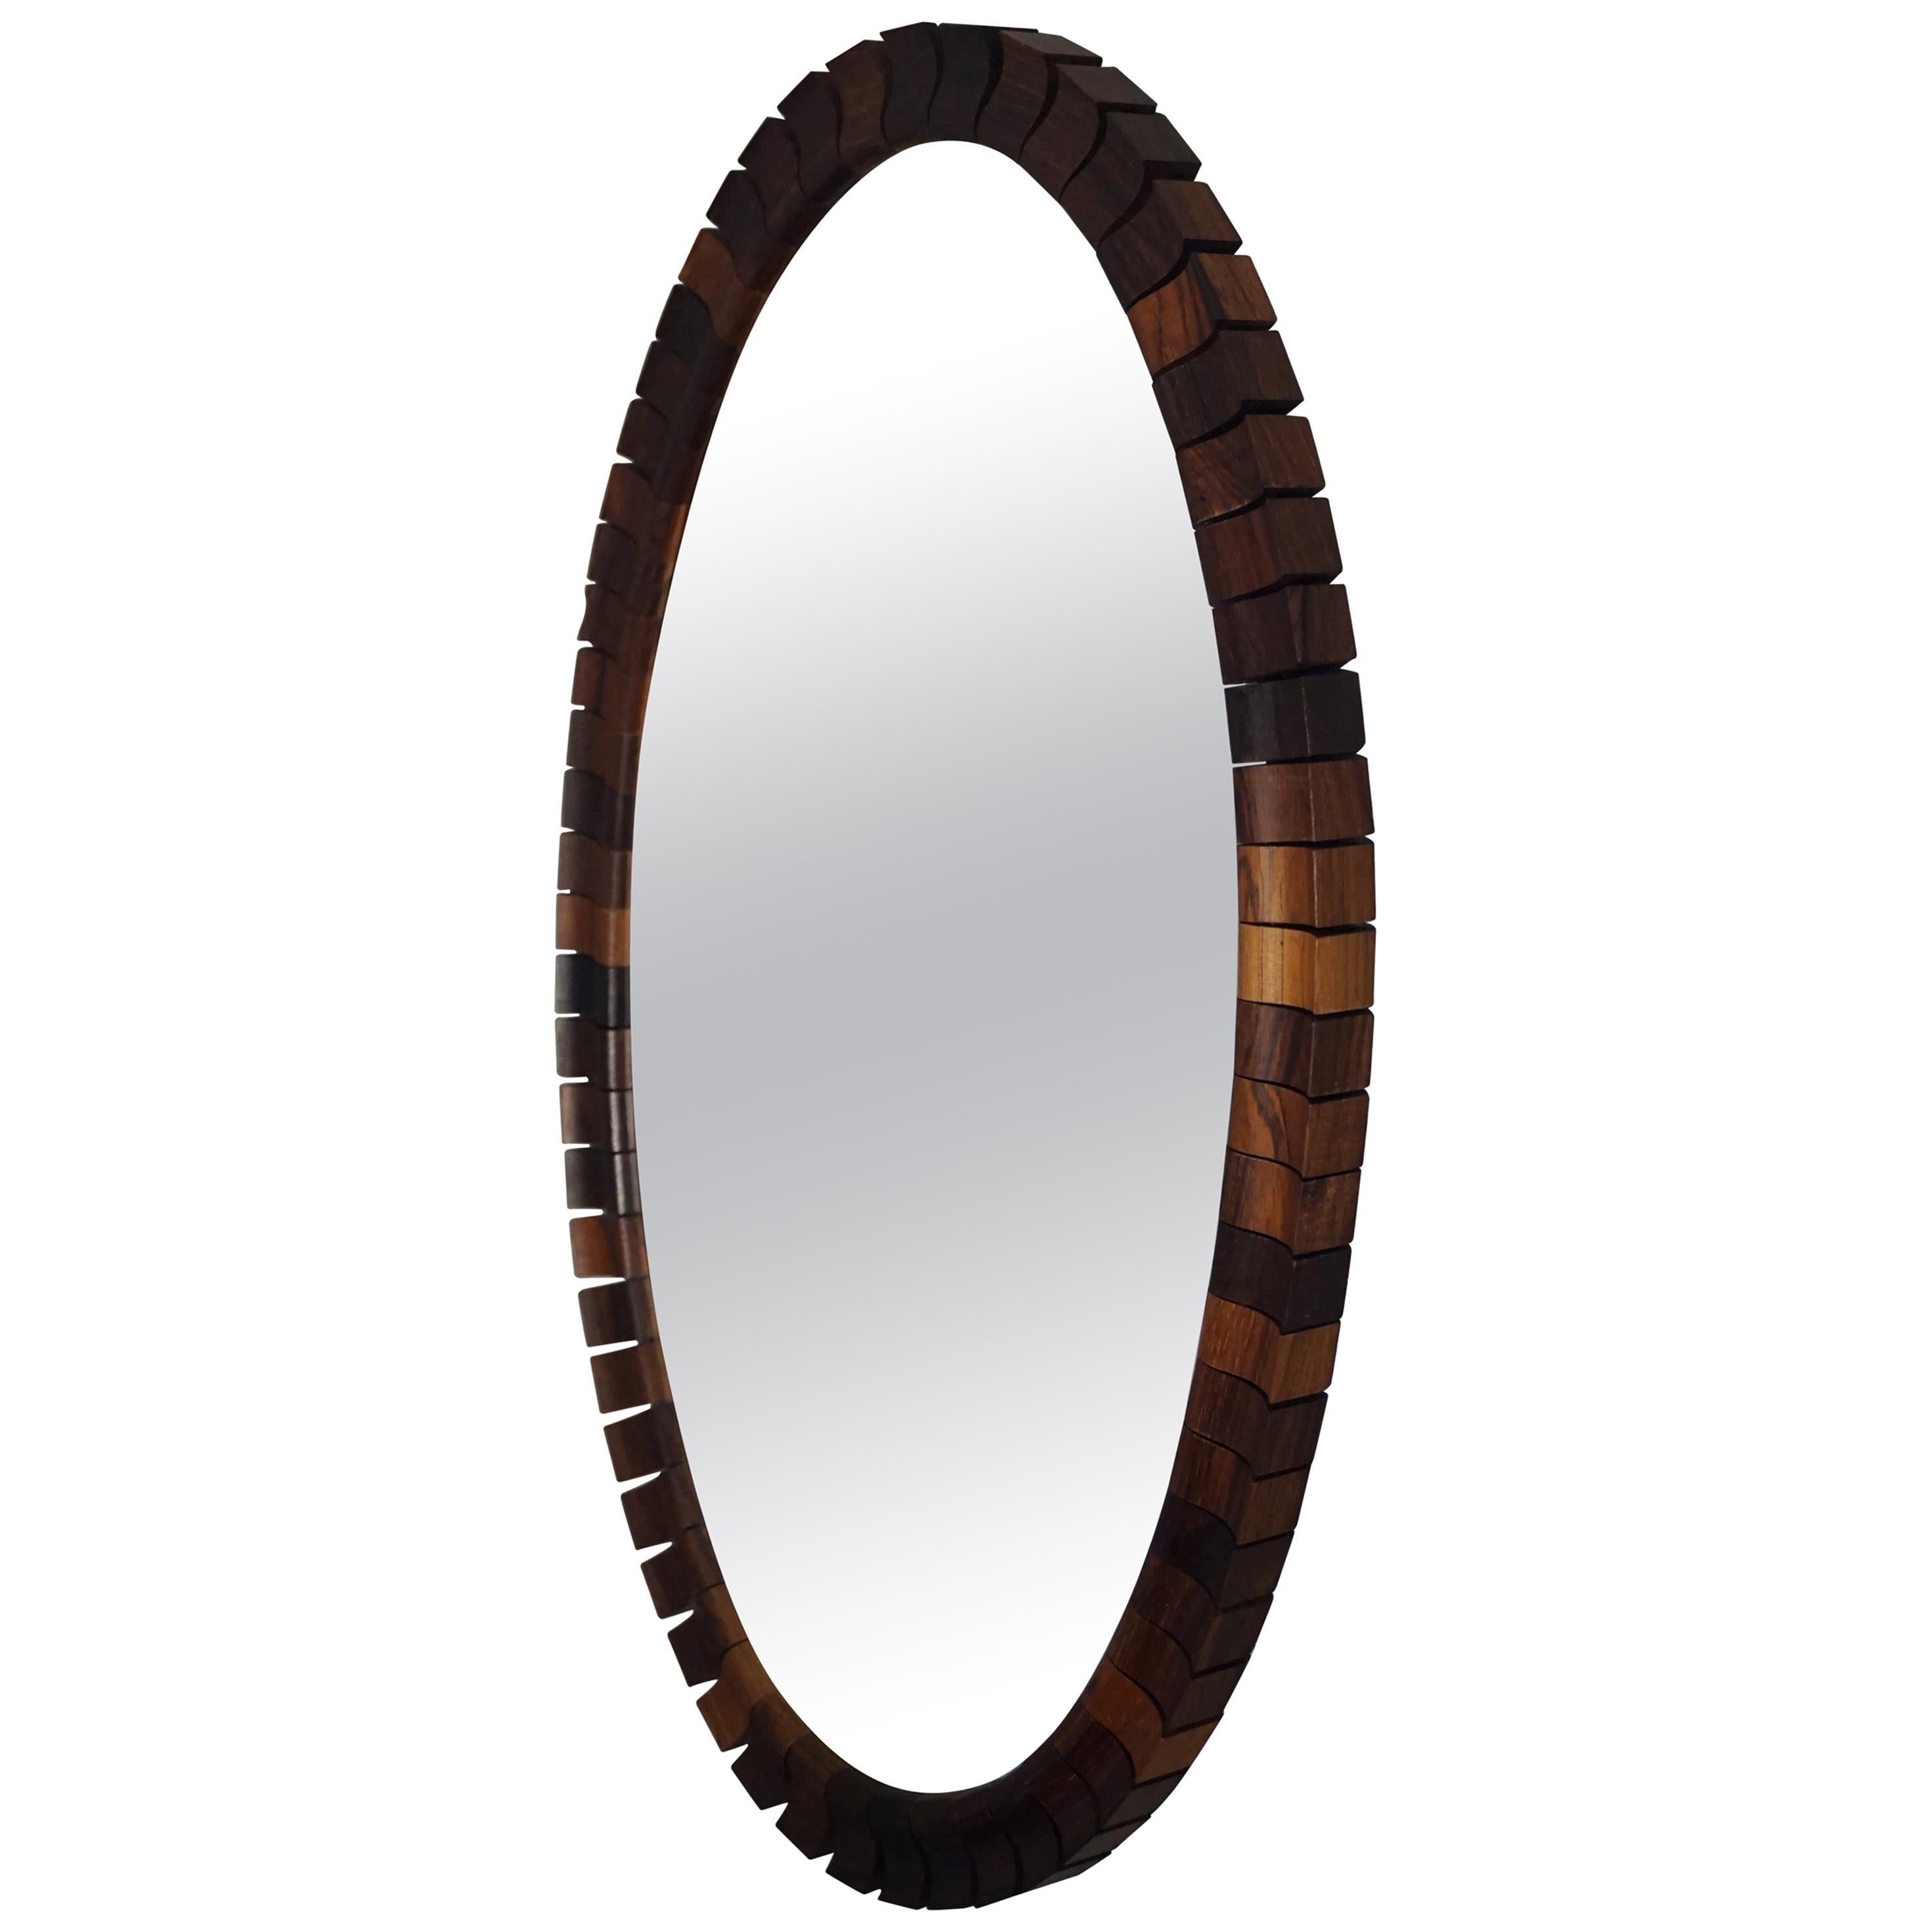 Striking Mid-Century Modern Oval Mirror in Handcrafted Geometrical Wooden Frame